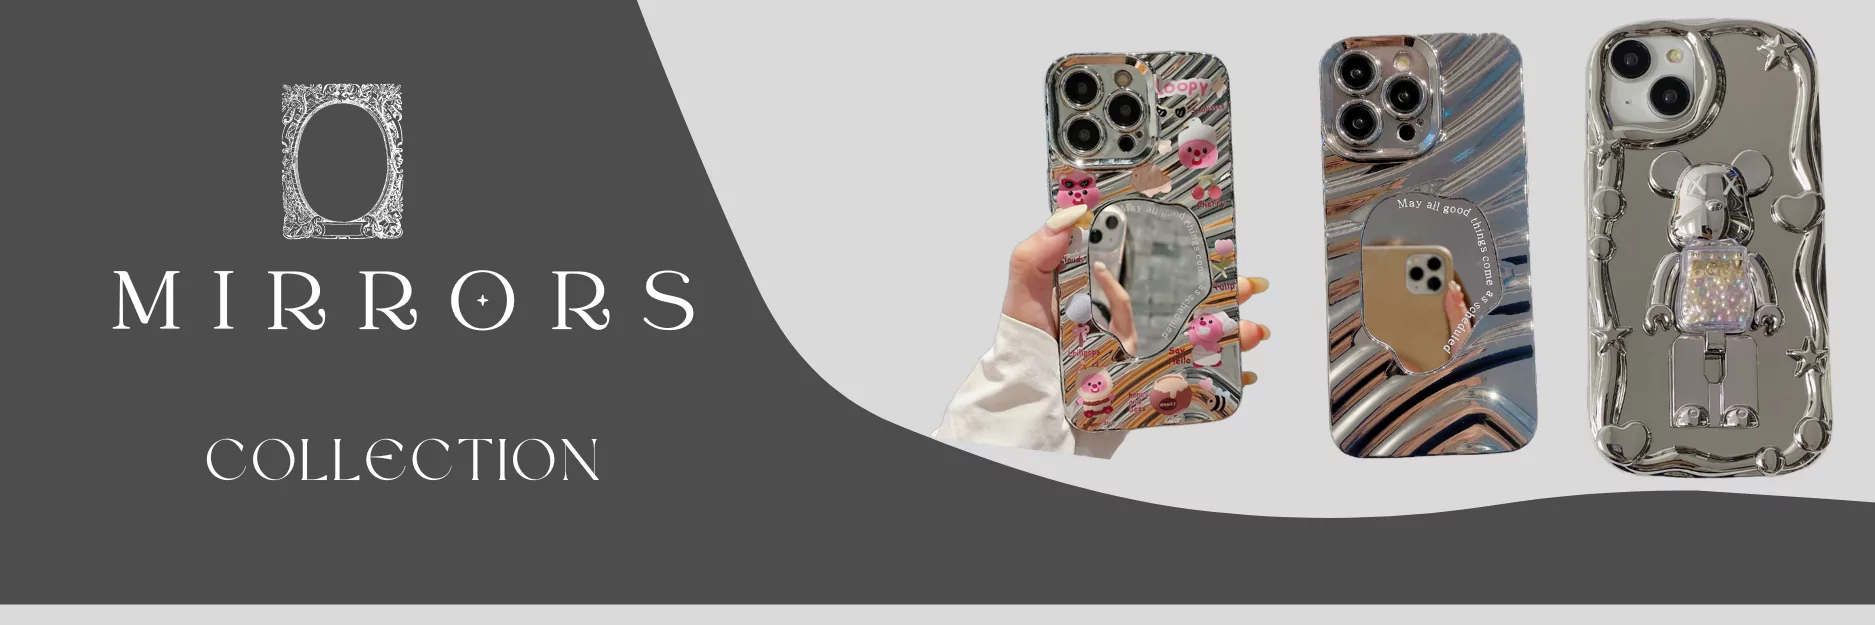 Mirrors Collection Phone Cases Banner